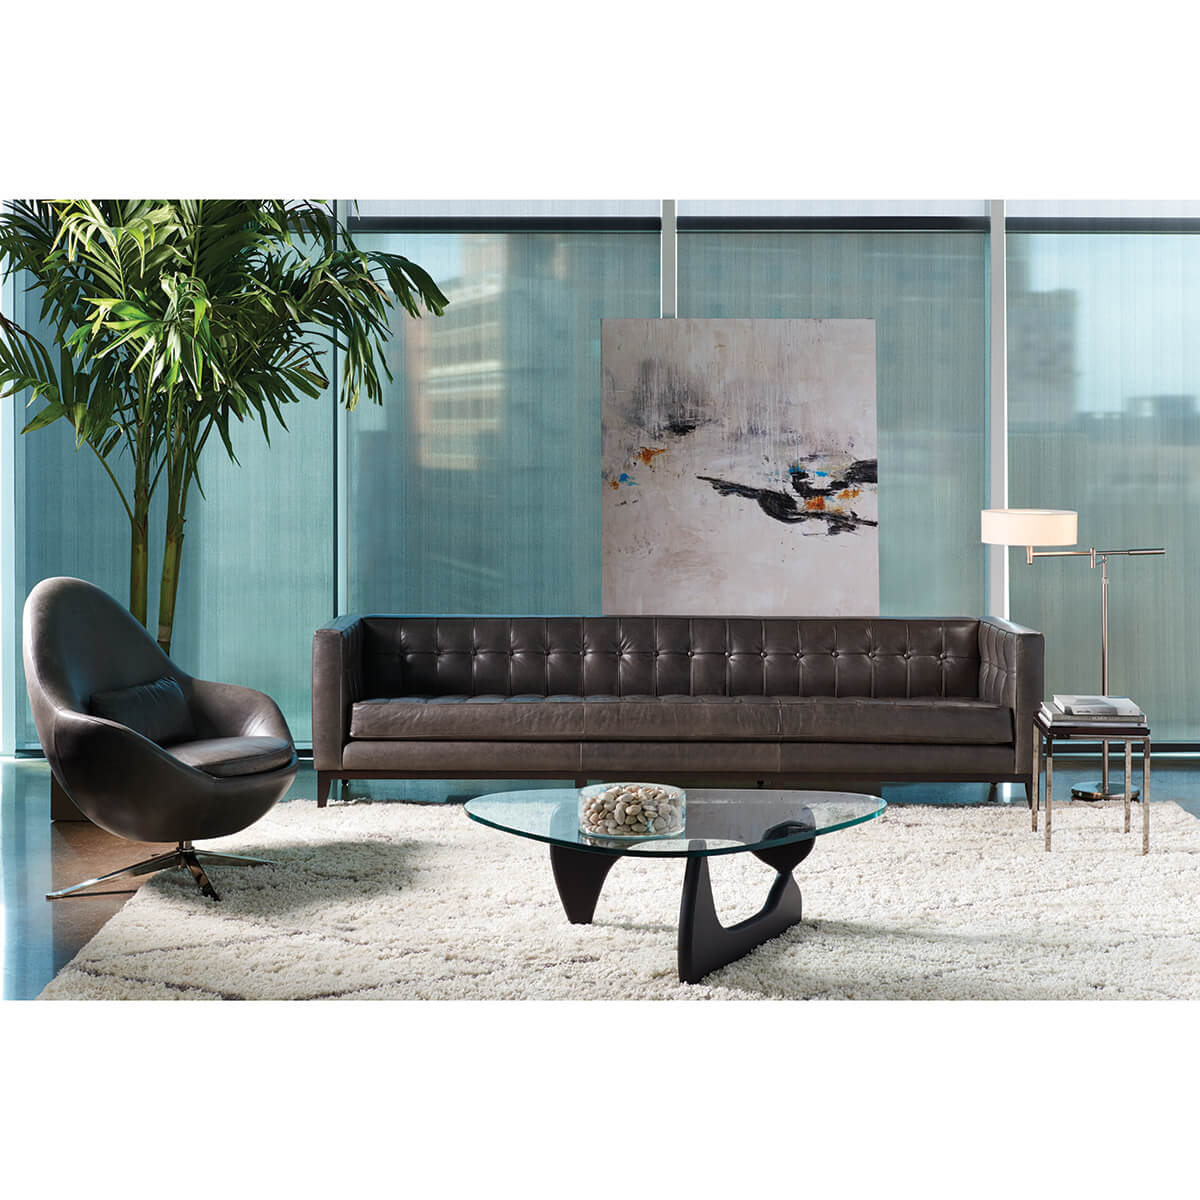 Read more about the article Jude/Luxe Living Room Collection